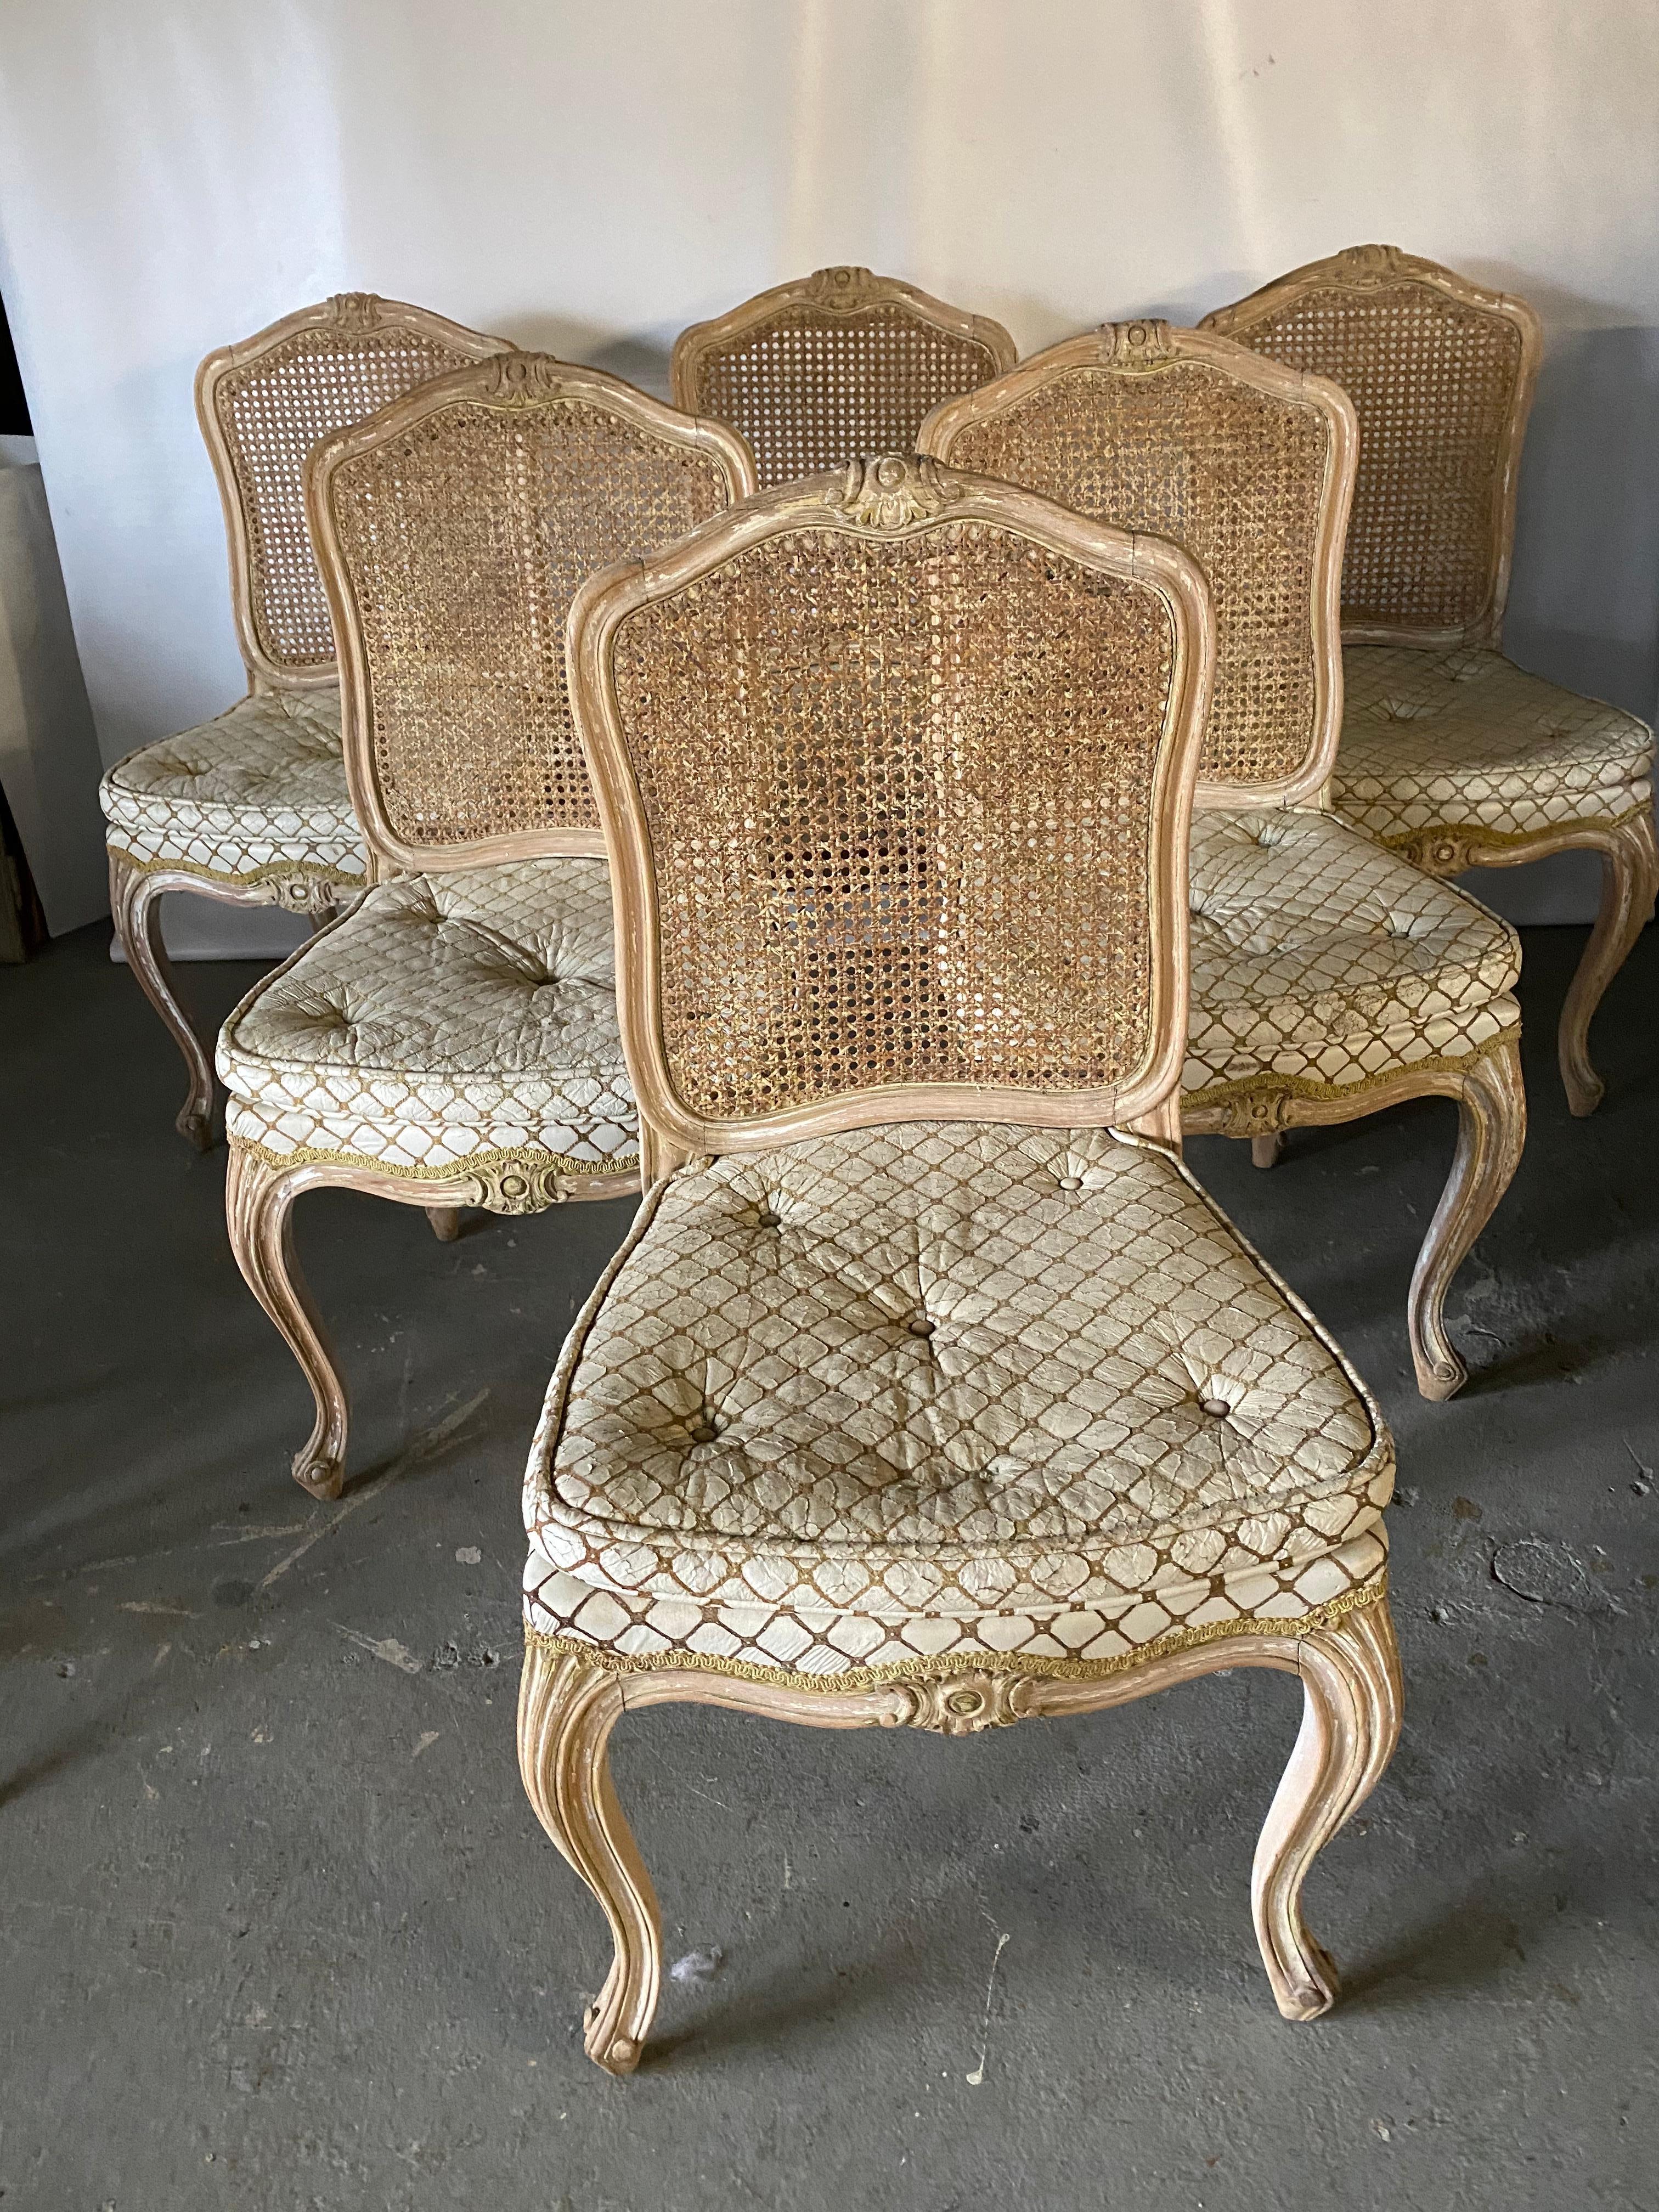 Set of 6 antique French Louis XV Provincial style painted dining chairs, upholstered seats with caned backs. Paint has mostly been lost but leaving it with great rustic country charm that is hard to duplicate. Chairs have carved crest detail on seat